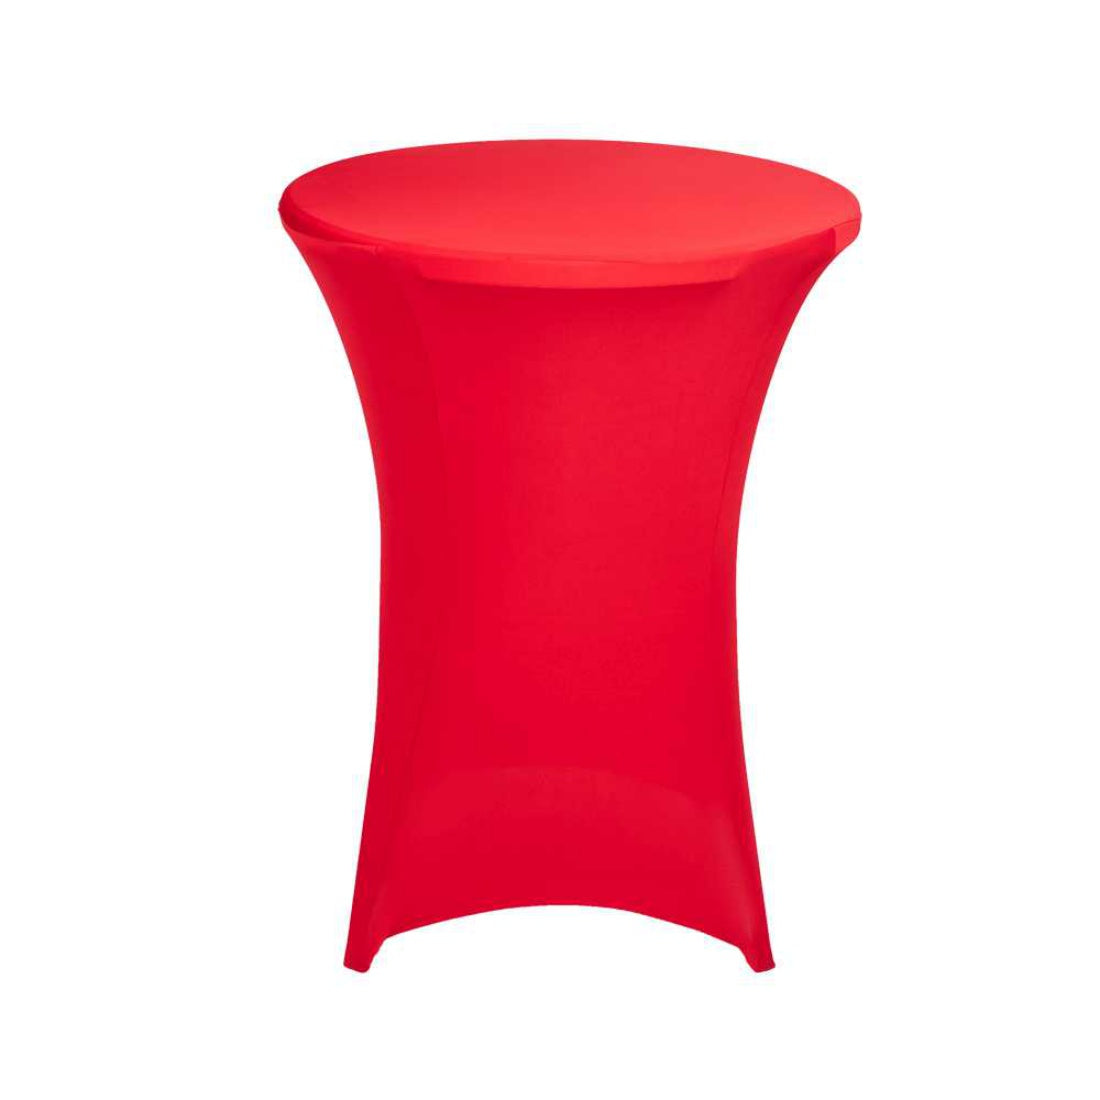 Red Standing Bar Folding Table & Cover Party Functions Portable Light New